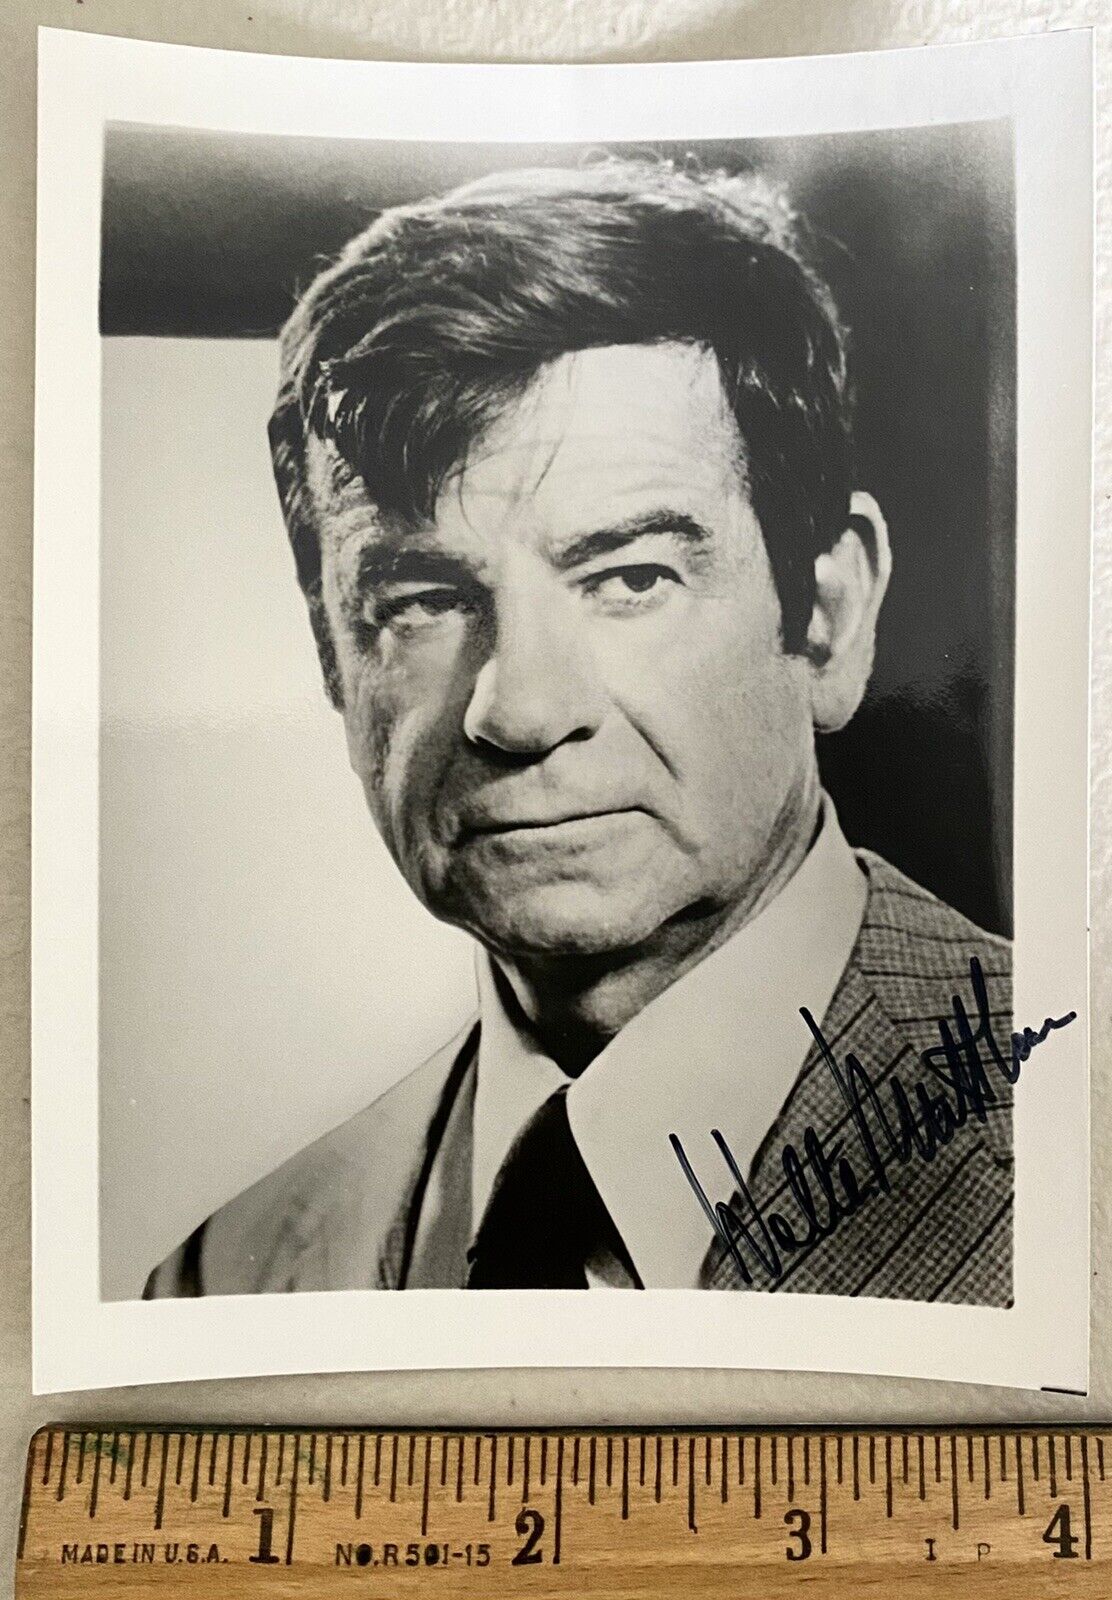 Walter Matthau Signed Vintage Celebrity Autograph 4x5 Photo Poster painting The Odd Couple